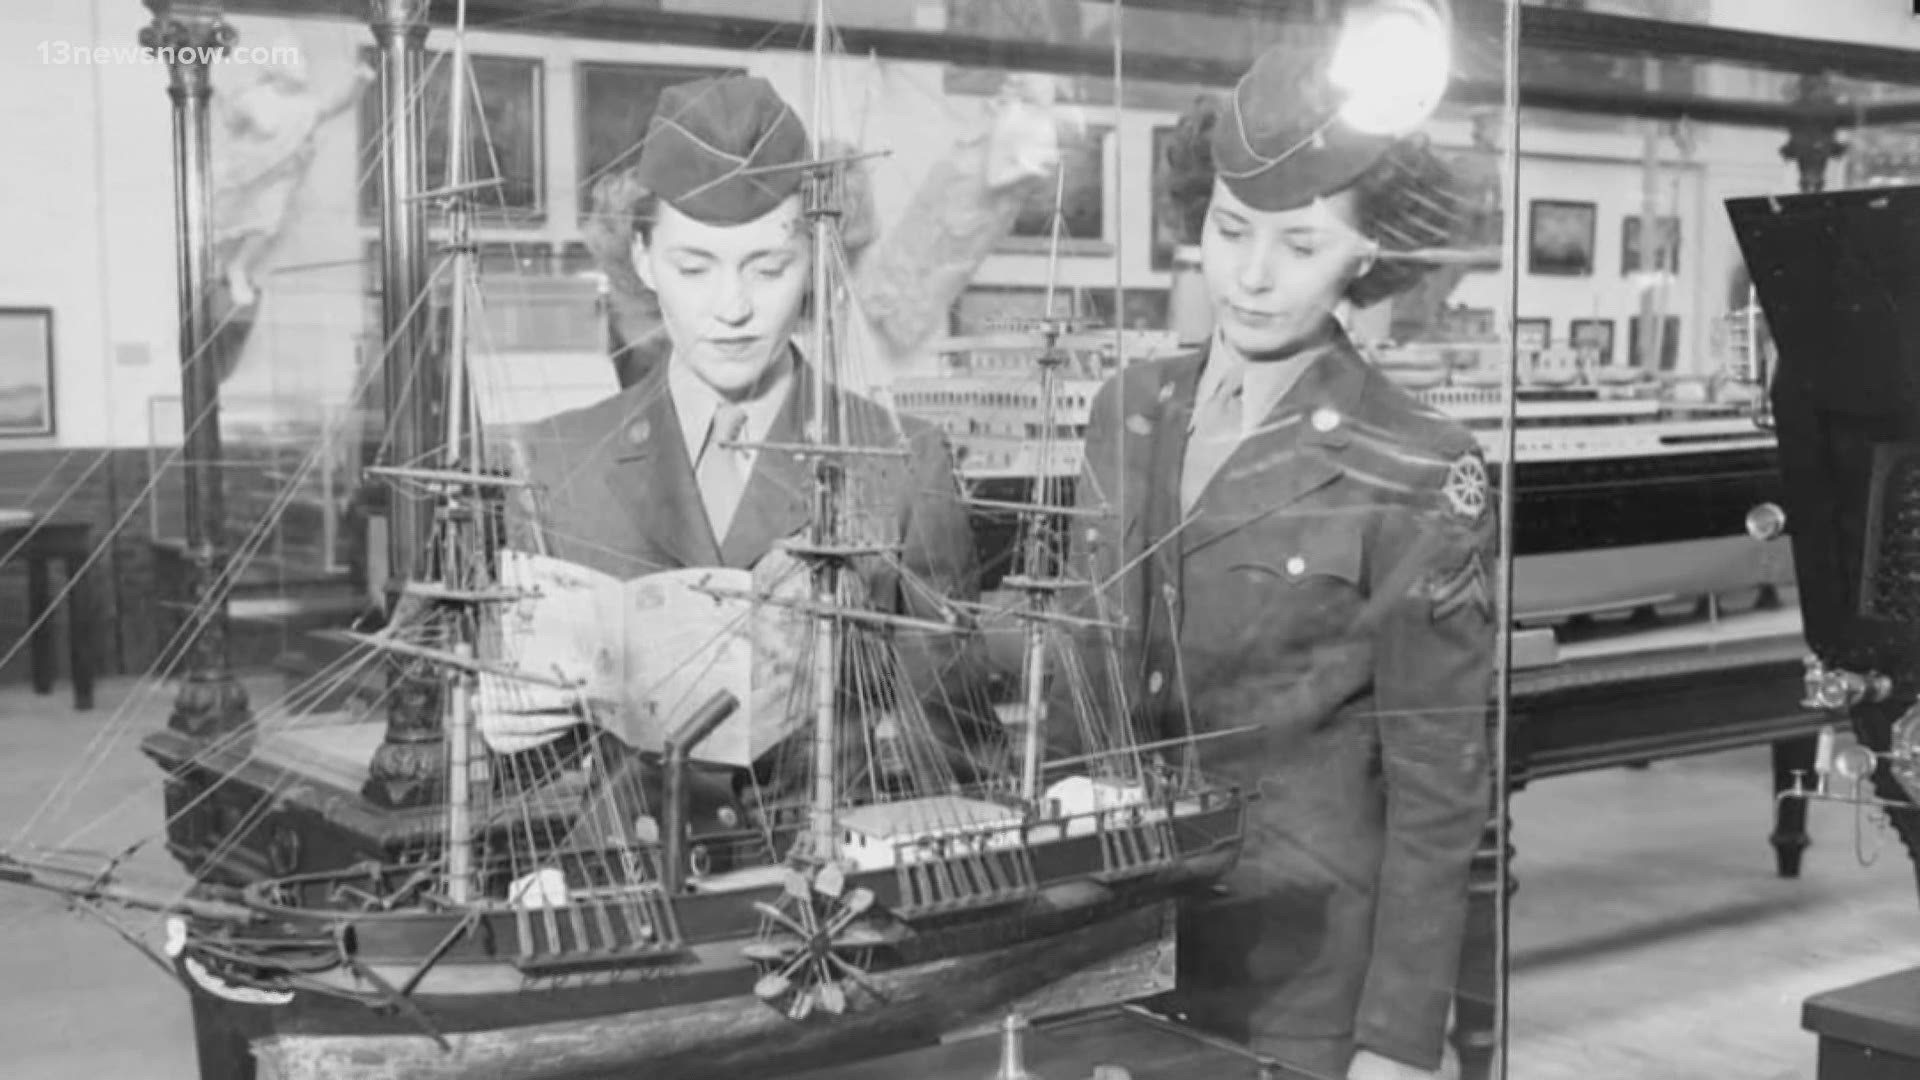 The Mariners' Museum is putting the spotlight on women who made an impact when our country was at war.